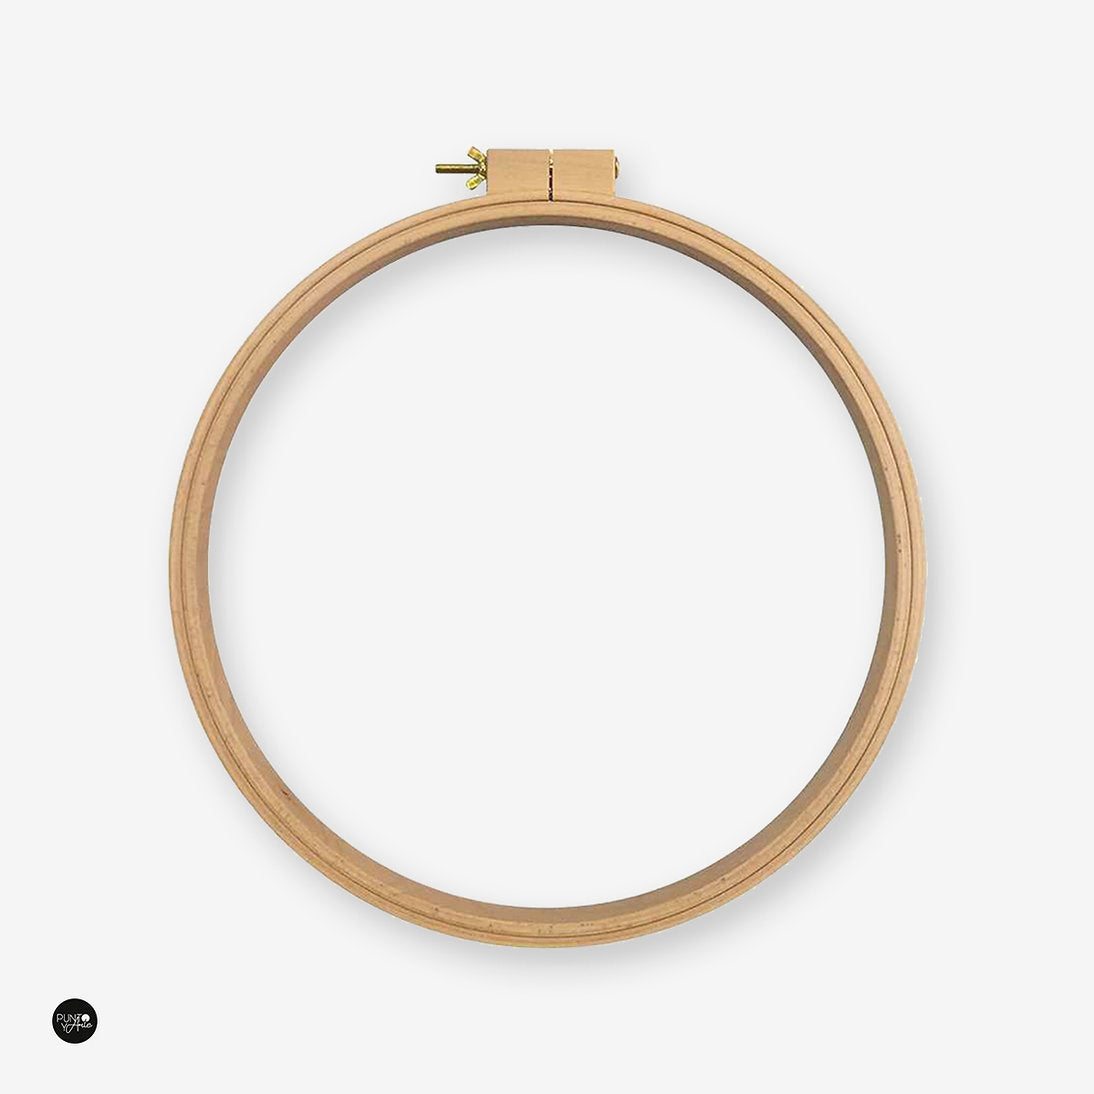 260 24 mm Wooden Hoop Frame - Nurge: Large, Robust and Elegant for Majestic Projects